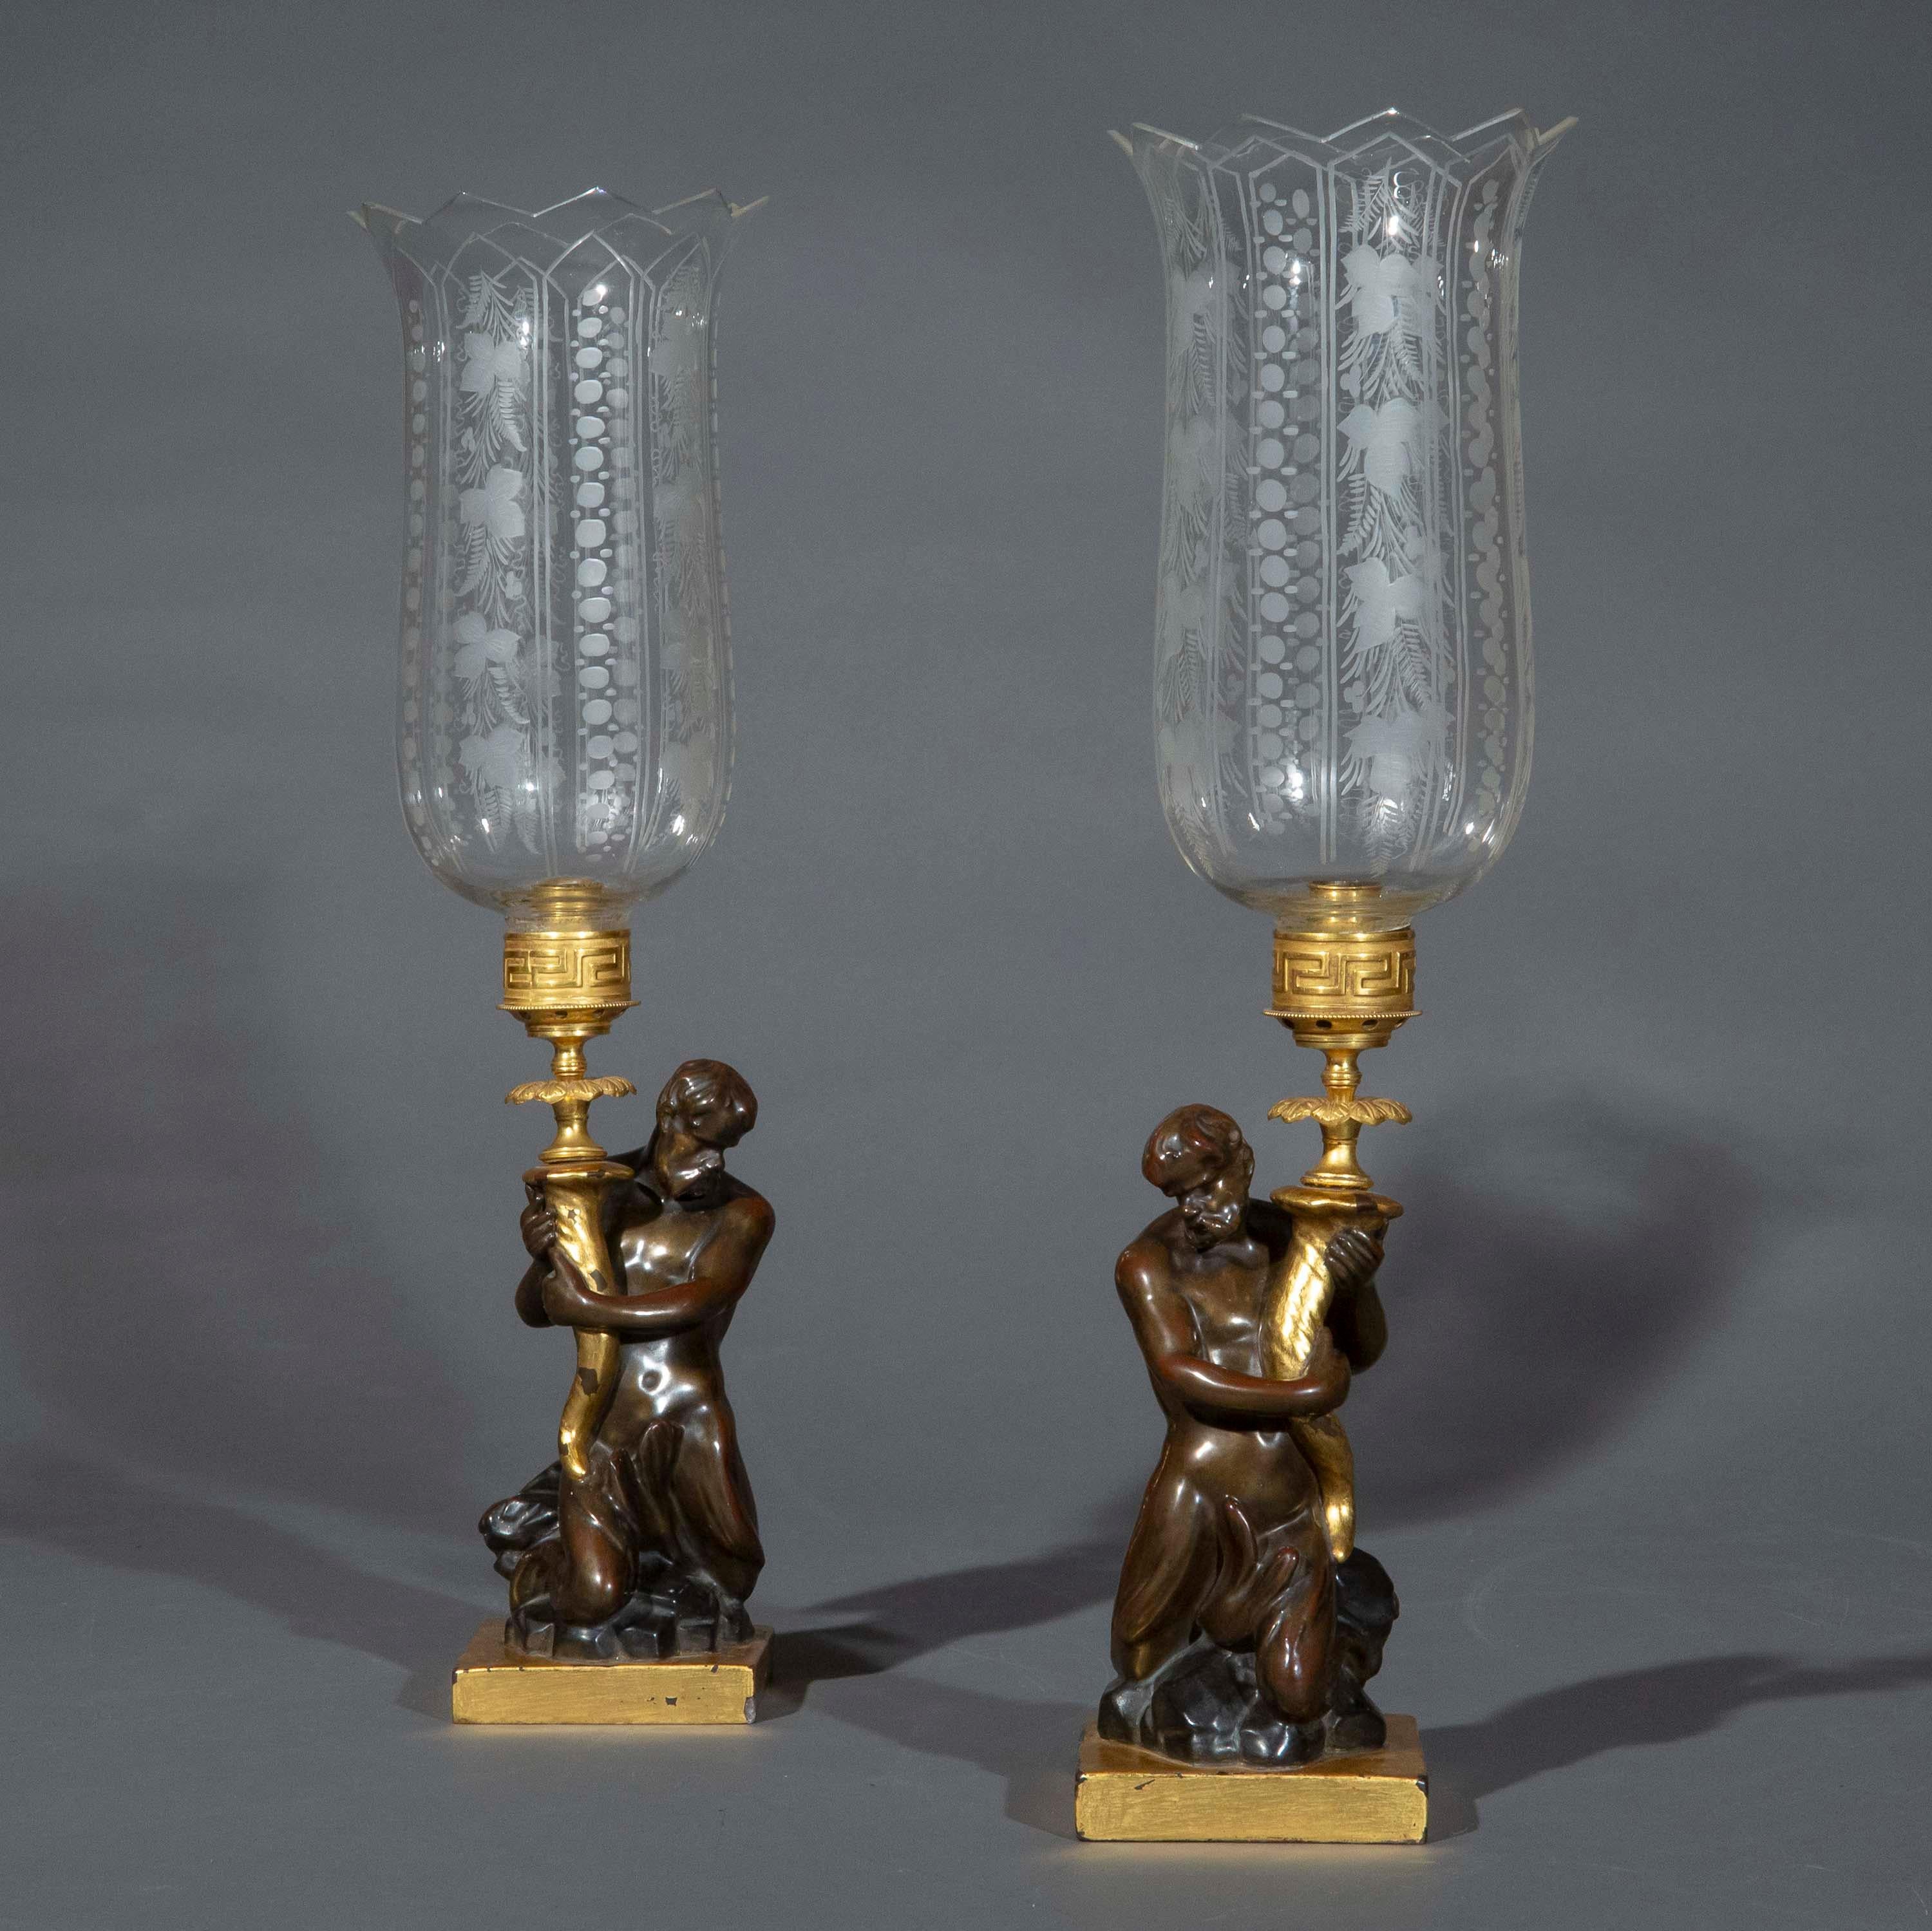 Pair of Early 19th Century Triton Candlesticks Storm Lanterns by Wood & Caldwell For Sale 3